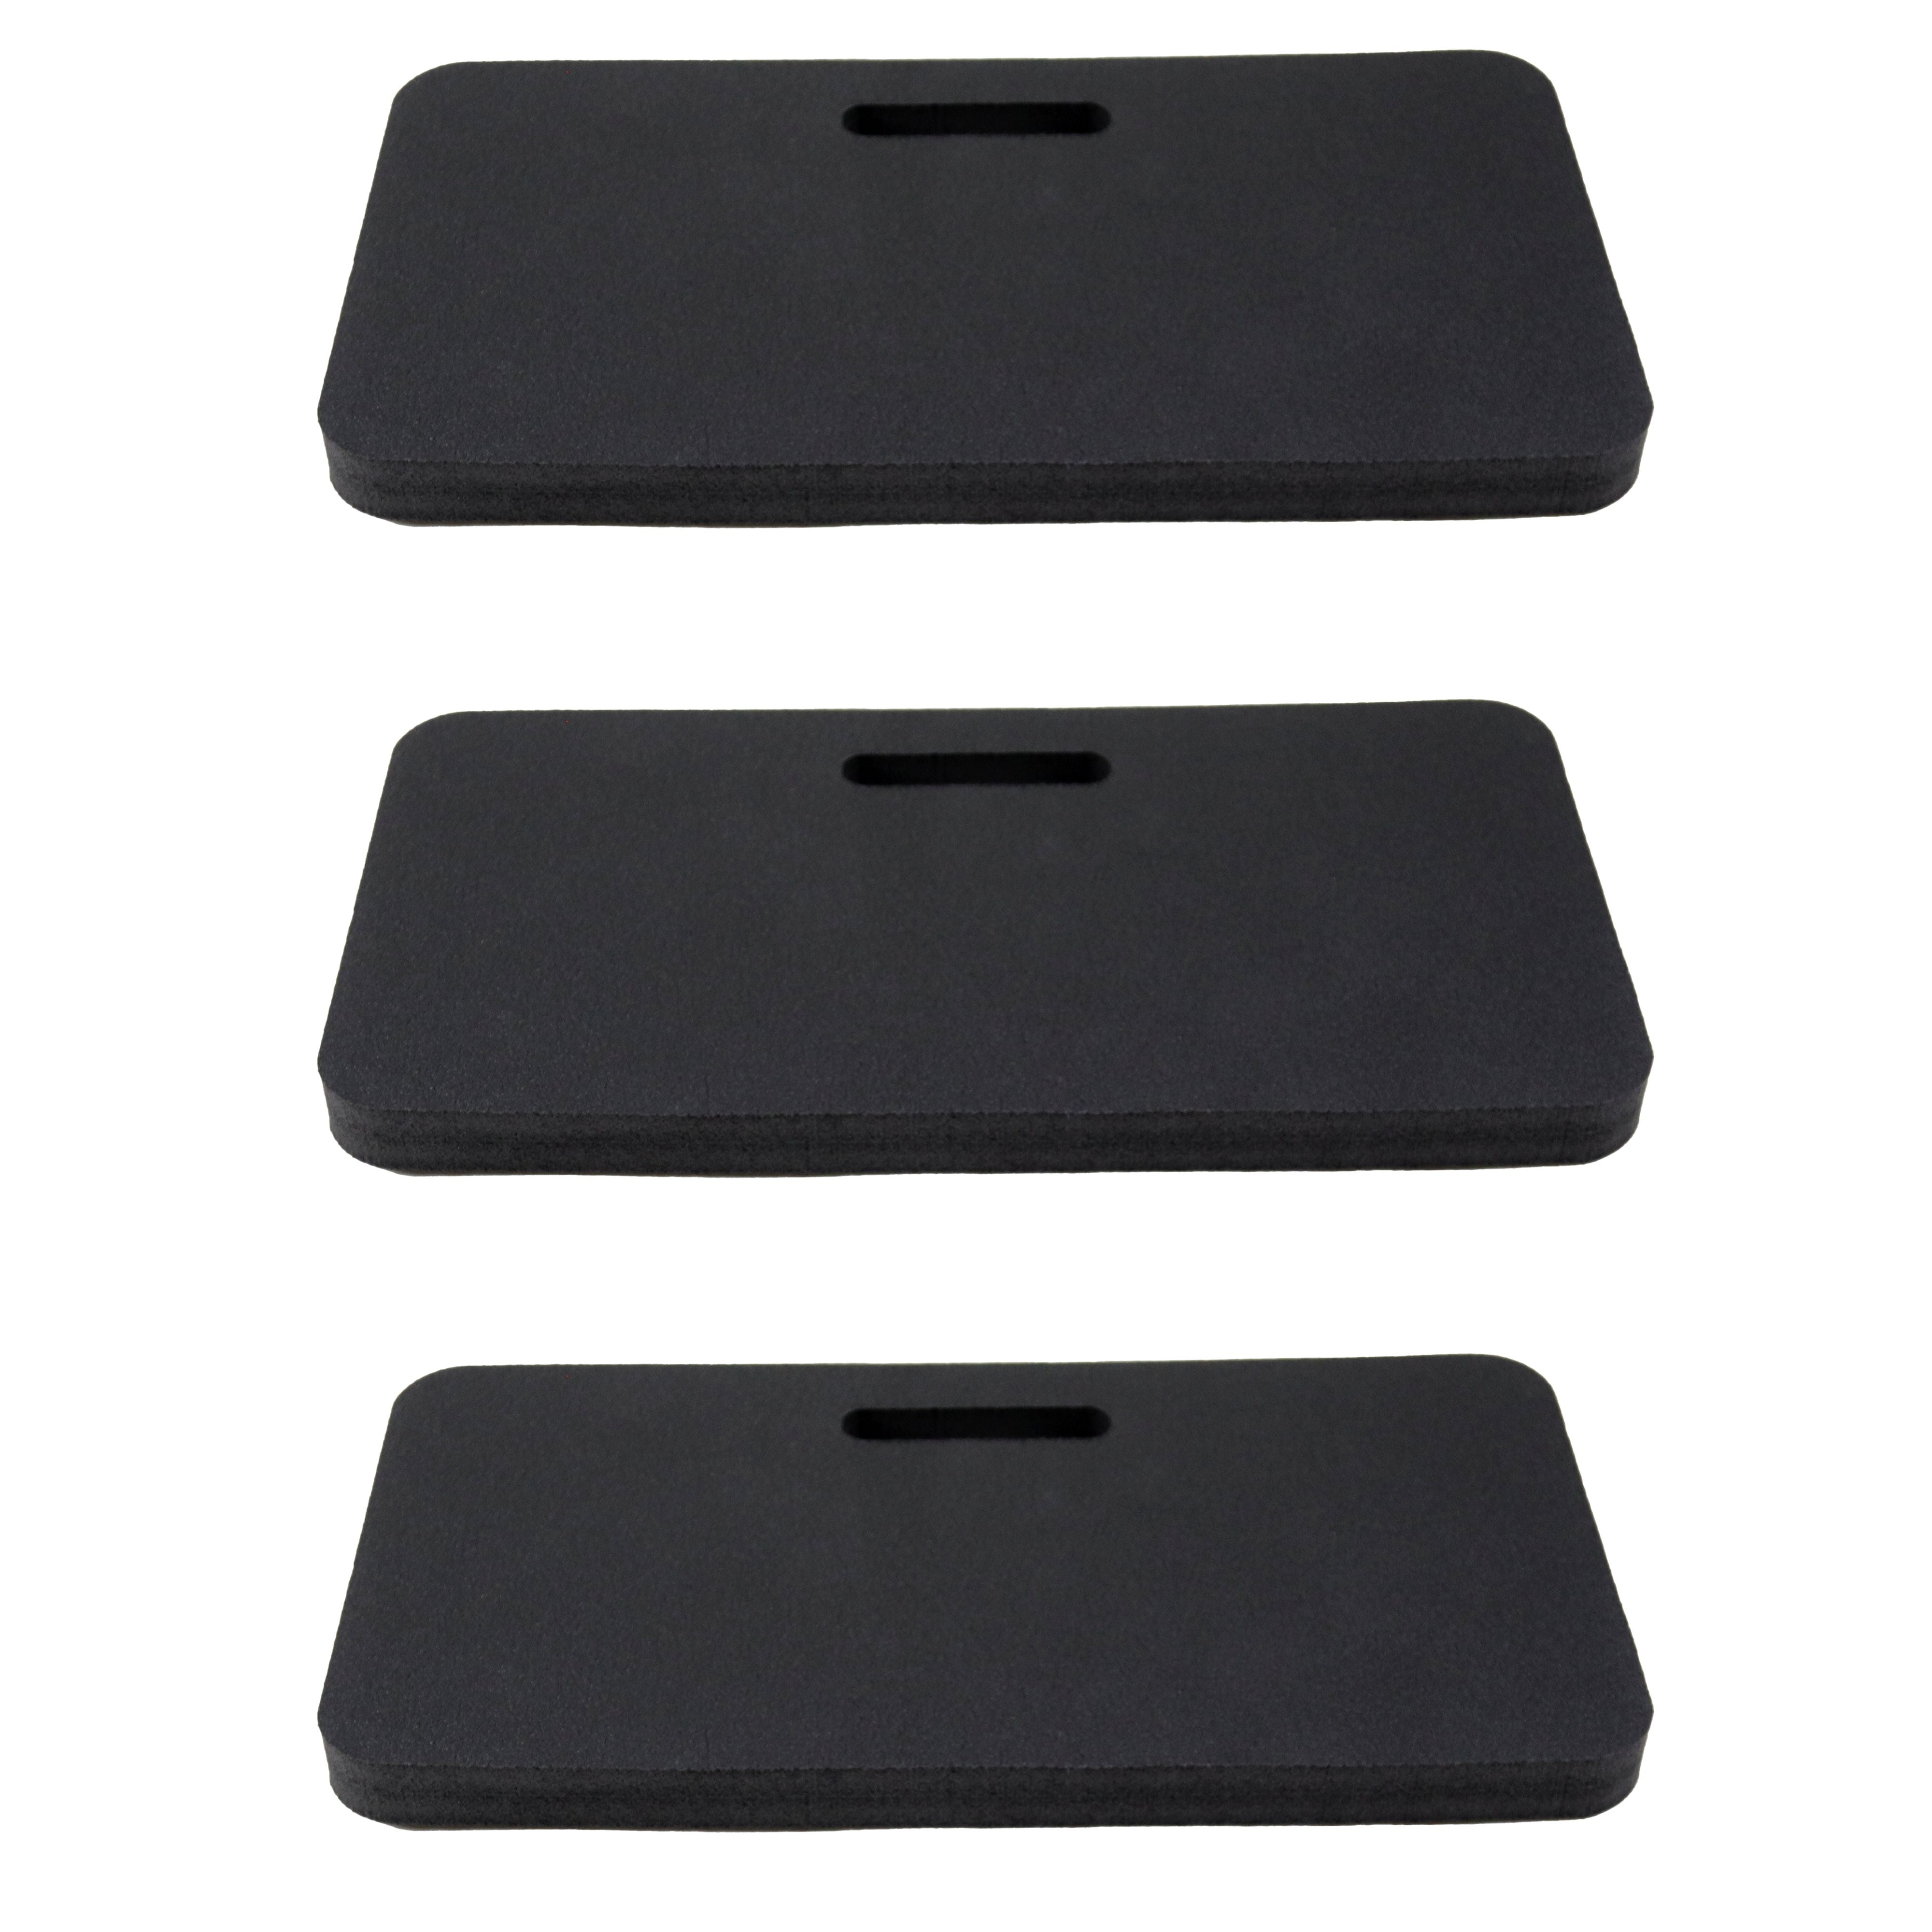 3 Portable Knee Cushions for Home Garden Work Automotive Workshop and More Durable Thick Comfortable High Density Waterproof Black Foam 16 x 8 Inches Kneeling Pad